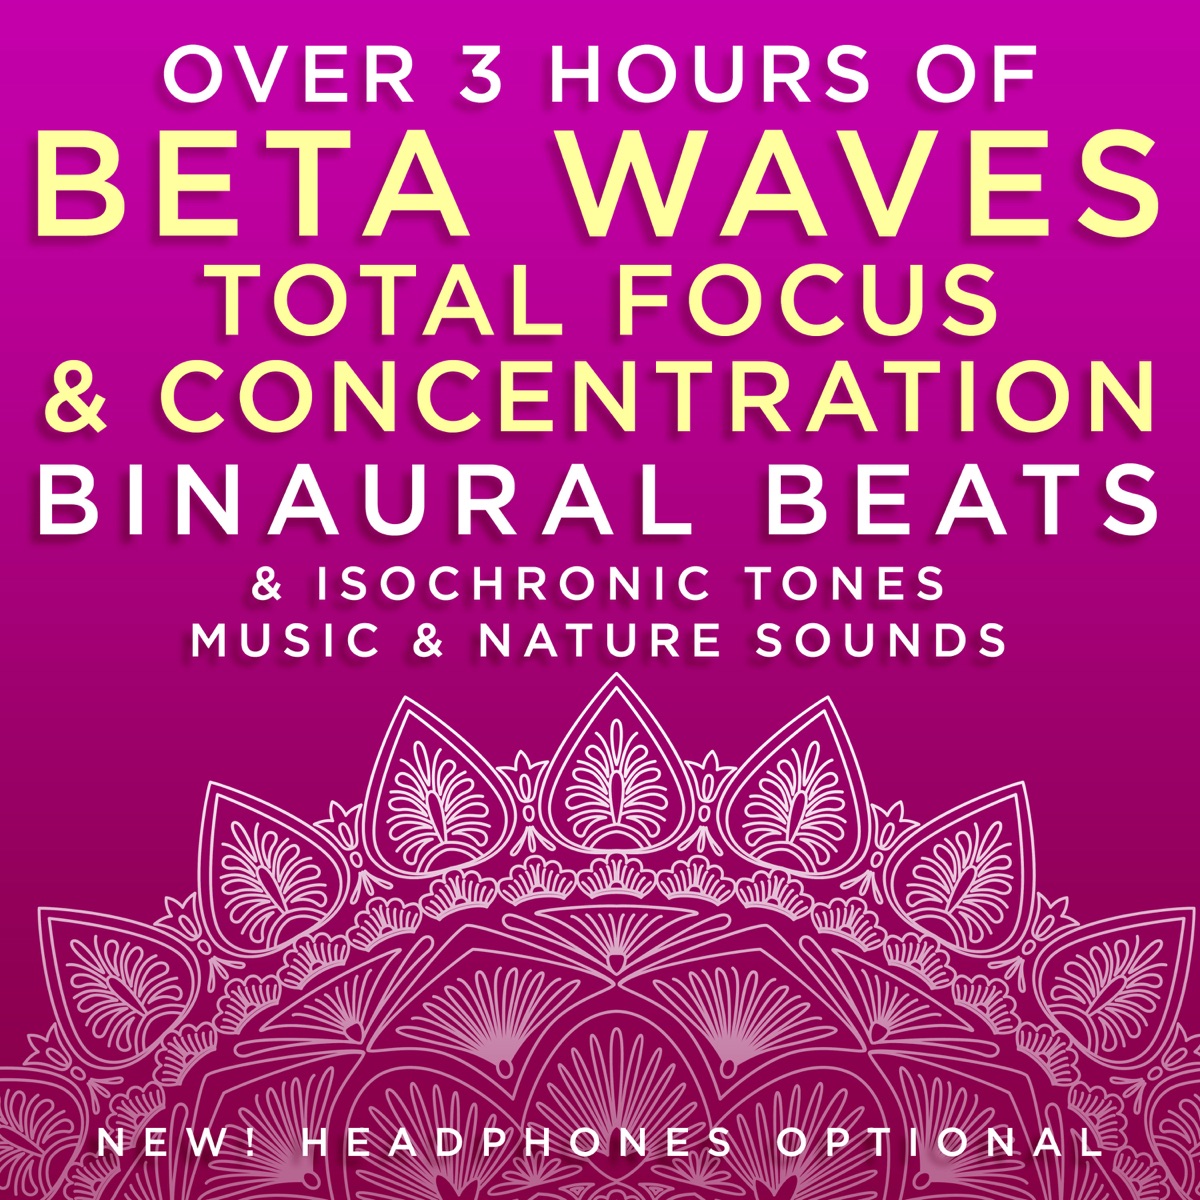 Over 3 Hours of Beta Waves Total Focus & Concentration Binaural Beats &  Isochronic Tones Music & Nature Sounds - Album by Binaural Beats Research &  David & Steve Gordon - Apple Music